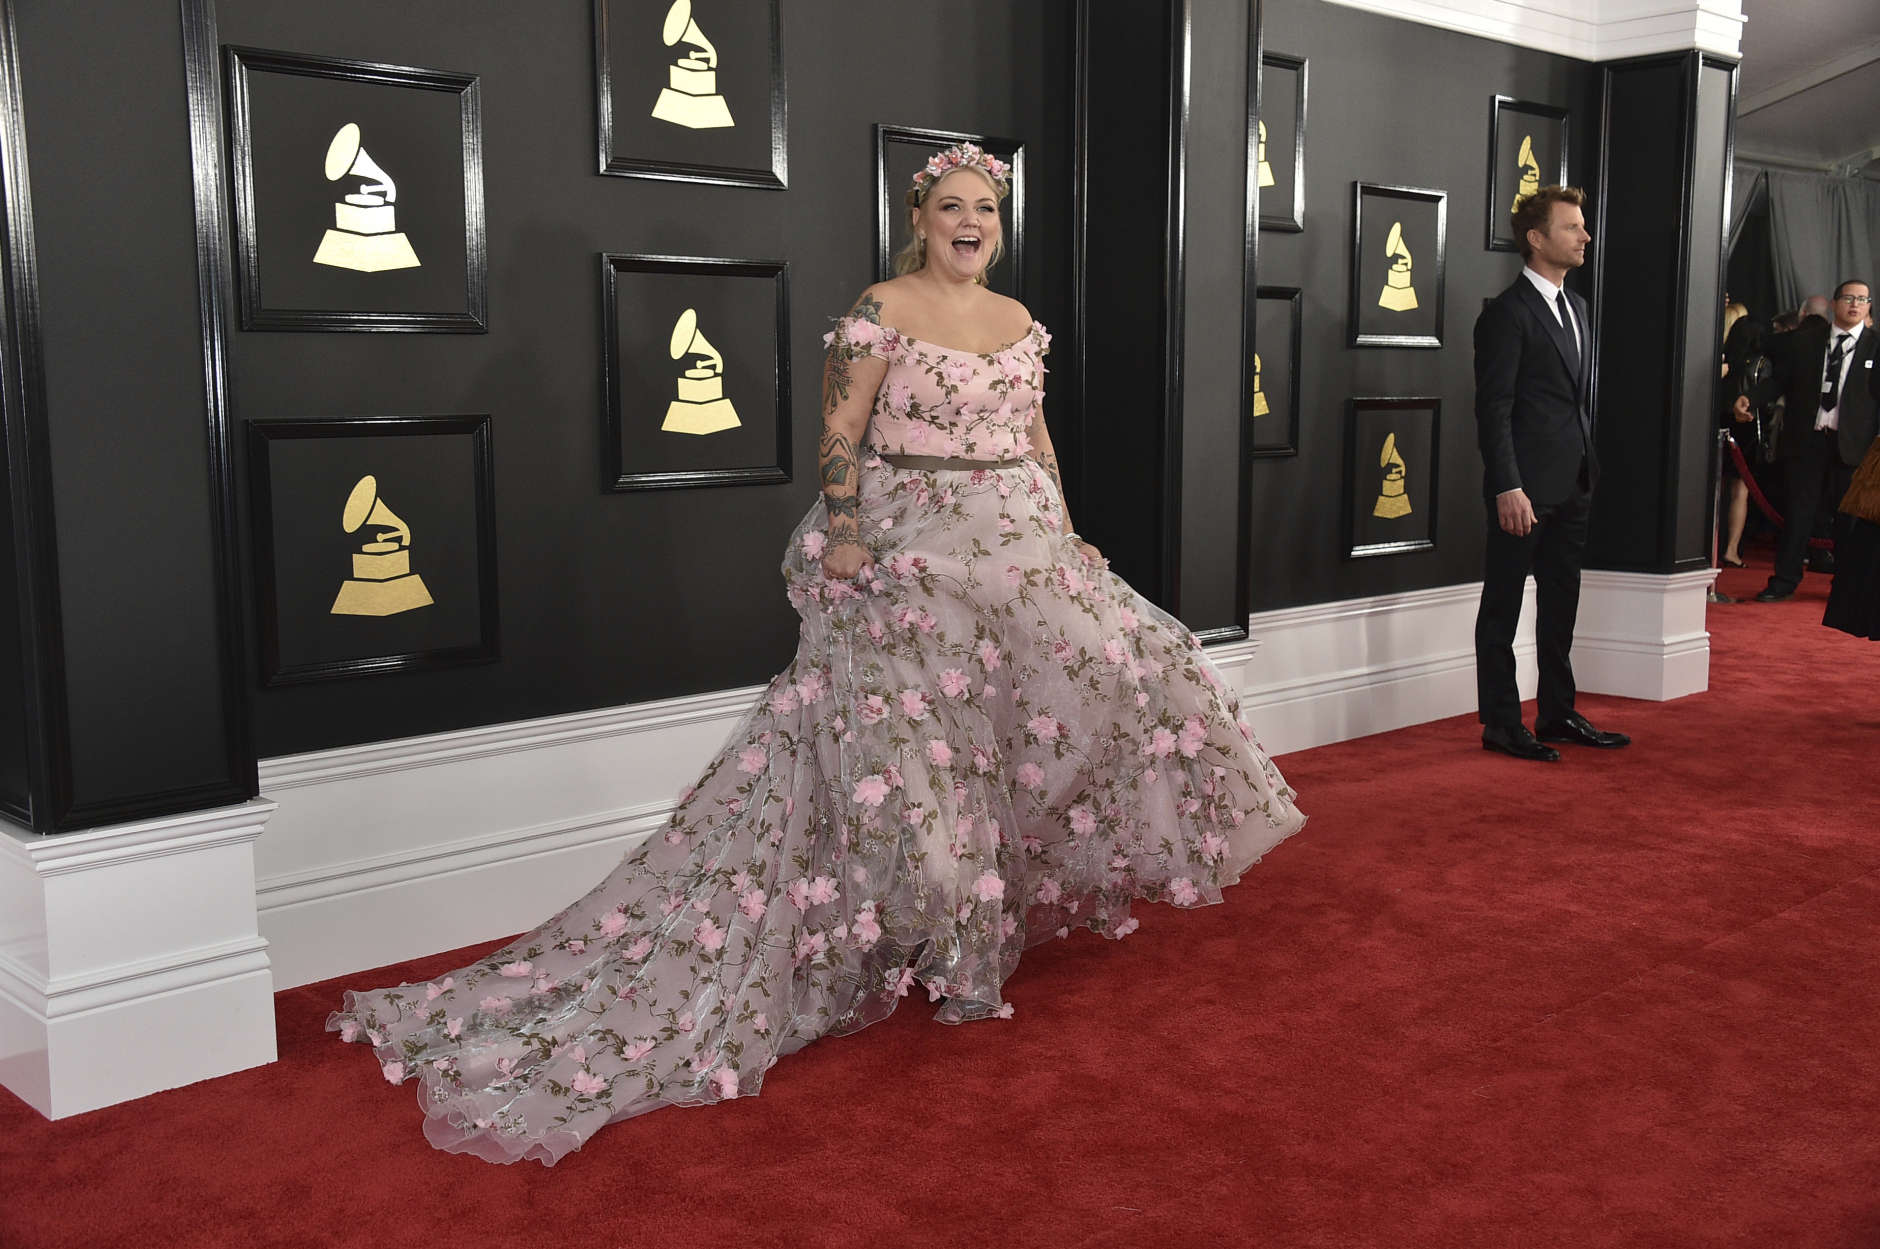 Elle King arrives at the 59th annual Grammy Awards at the Staples Center on Sunday, Feb. 12, 2017, in Los Angeles. (Photo by Jordan Strauss/Invision/AP)